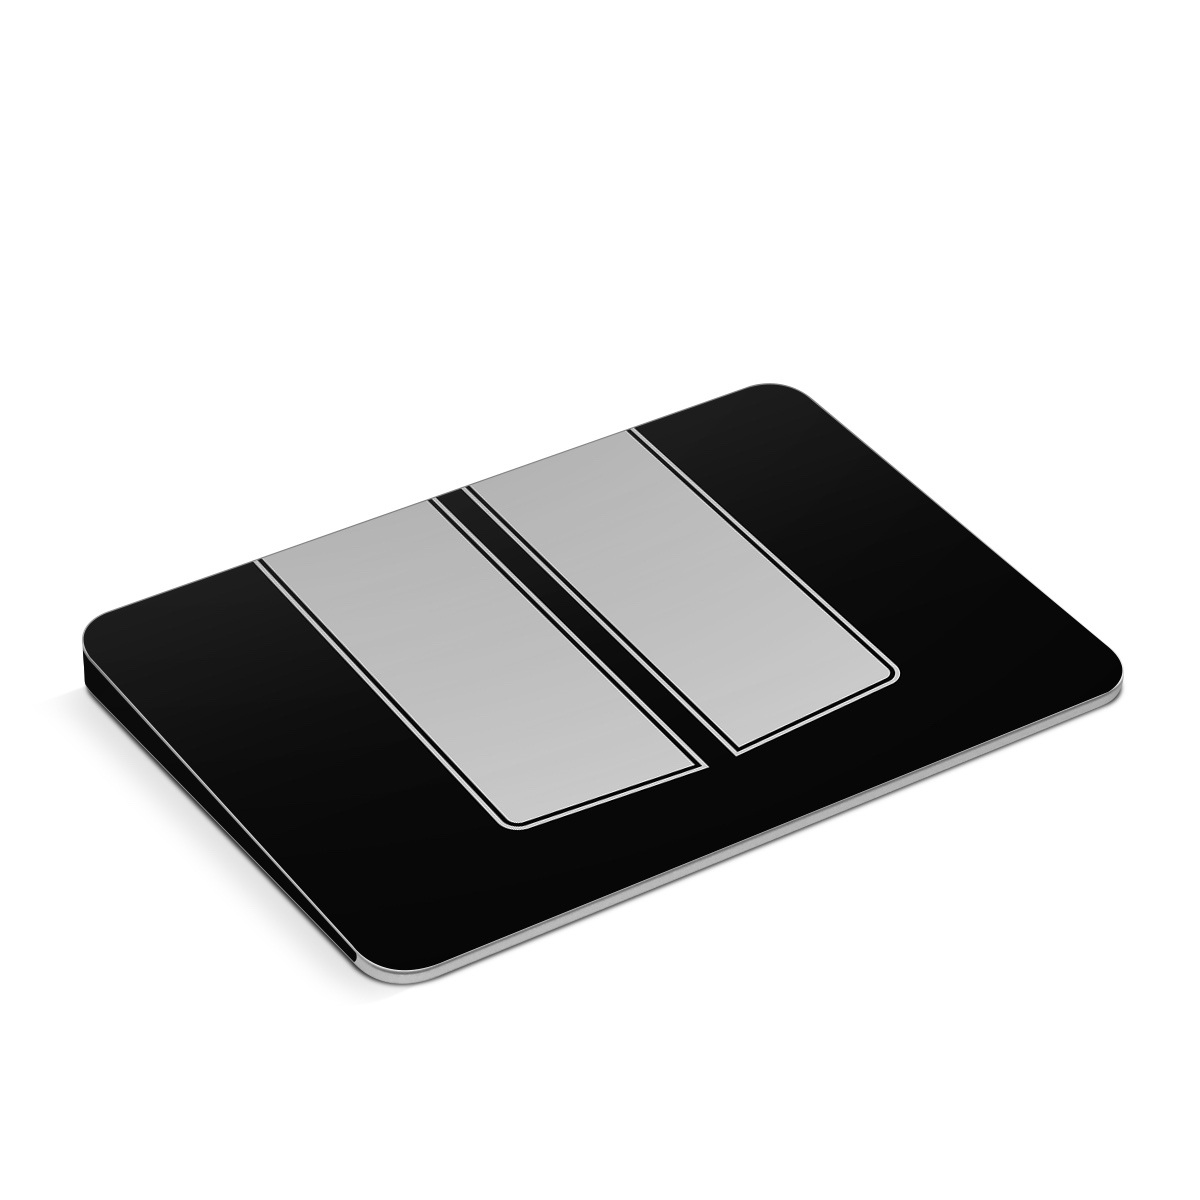 Apple Magic Trackpad Skin design of Font, Architecture, Rectangle, with black, gray colors